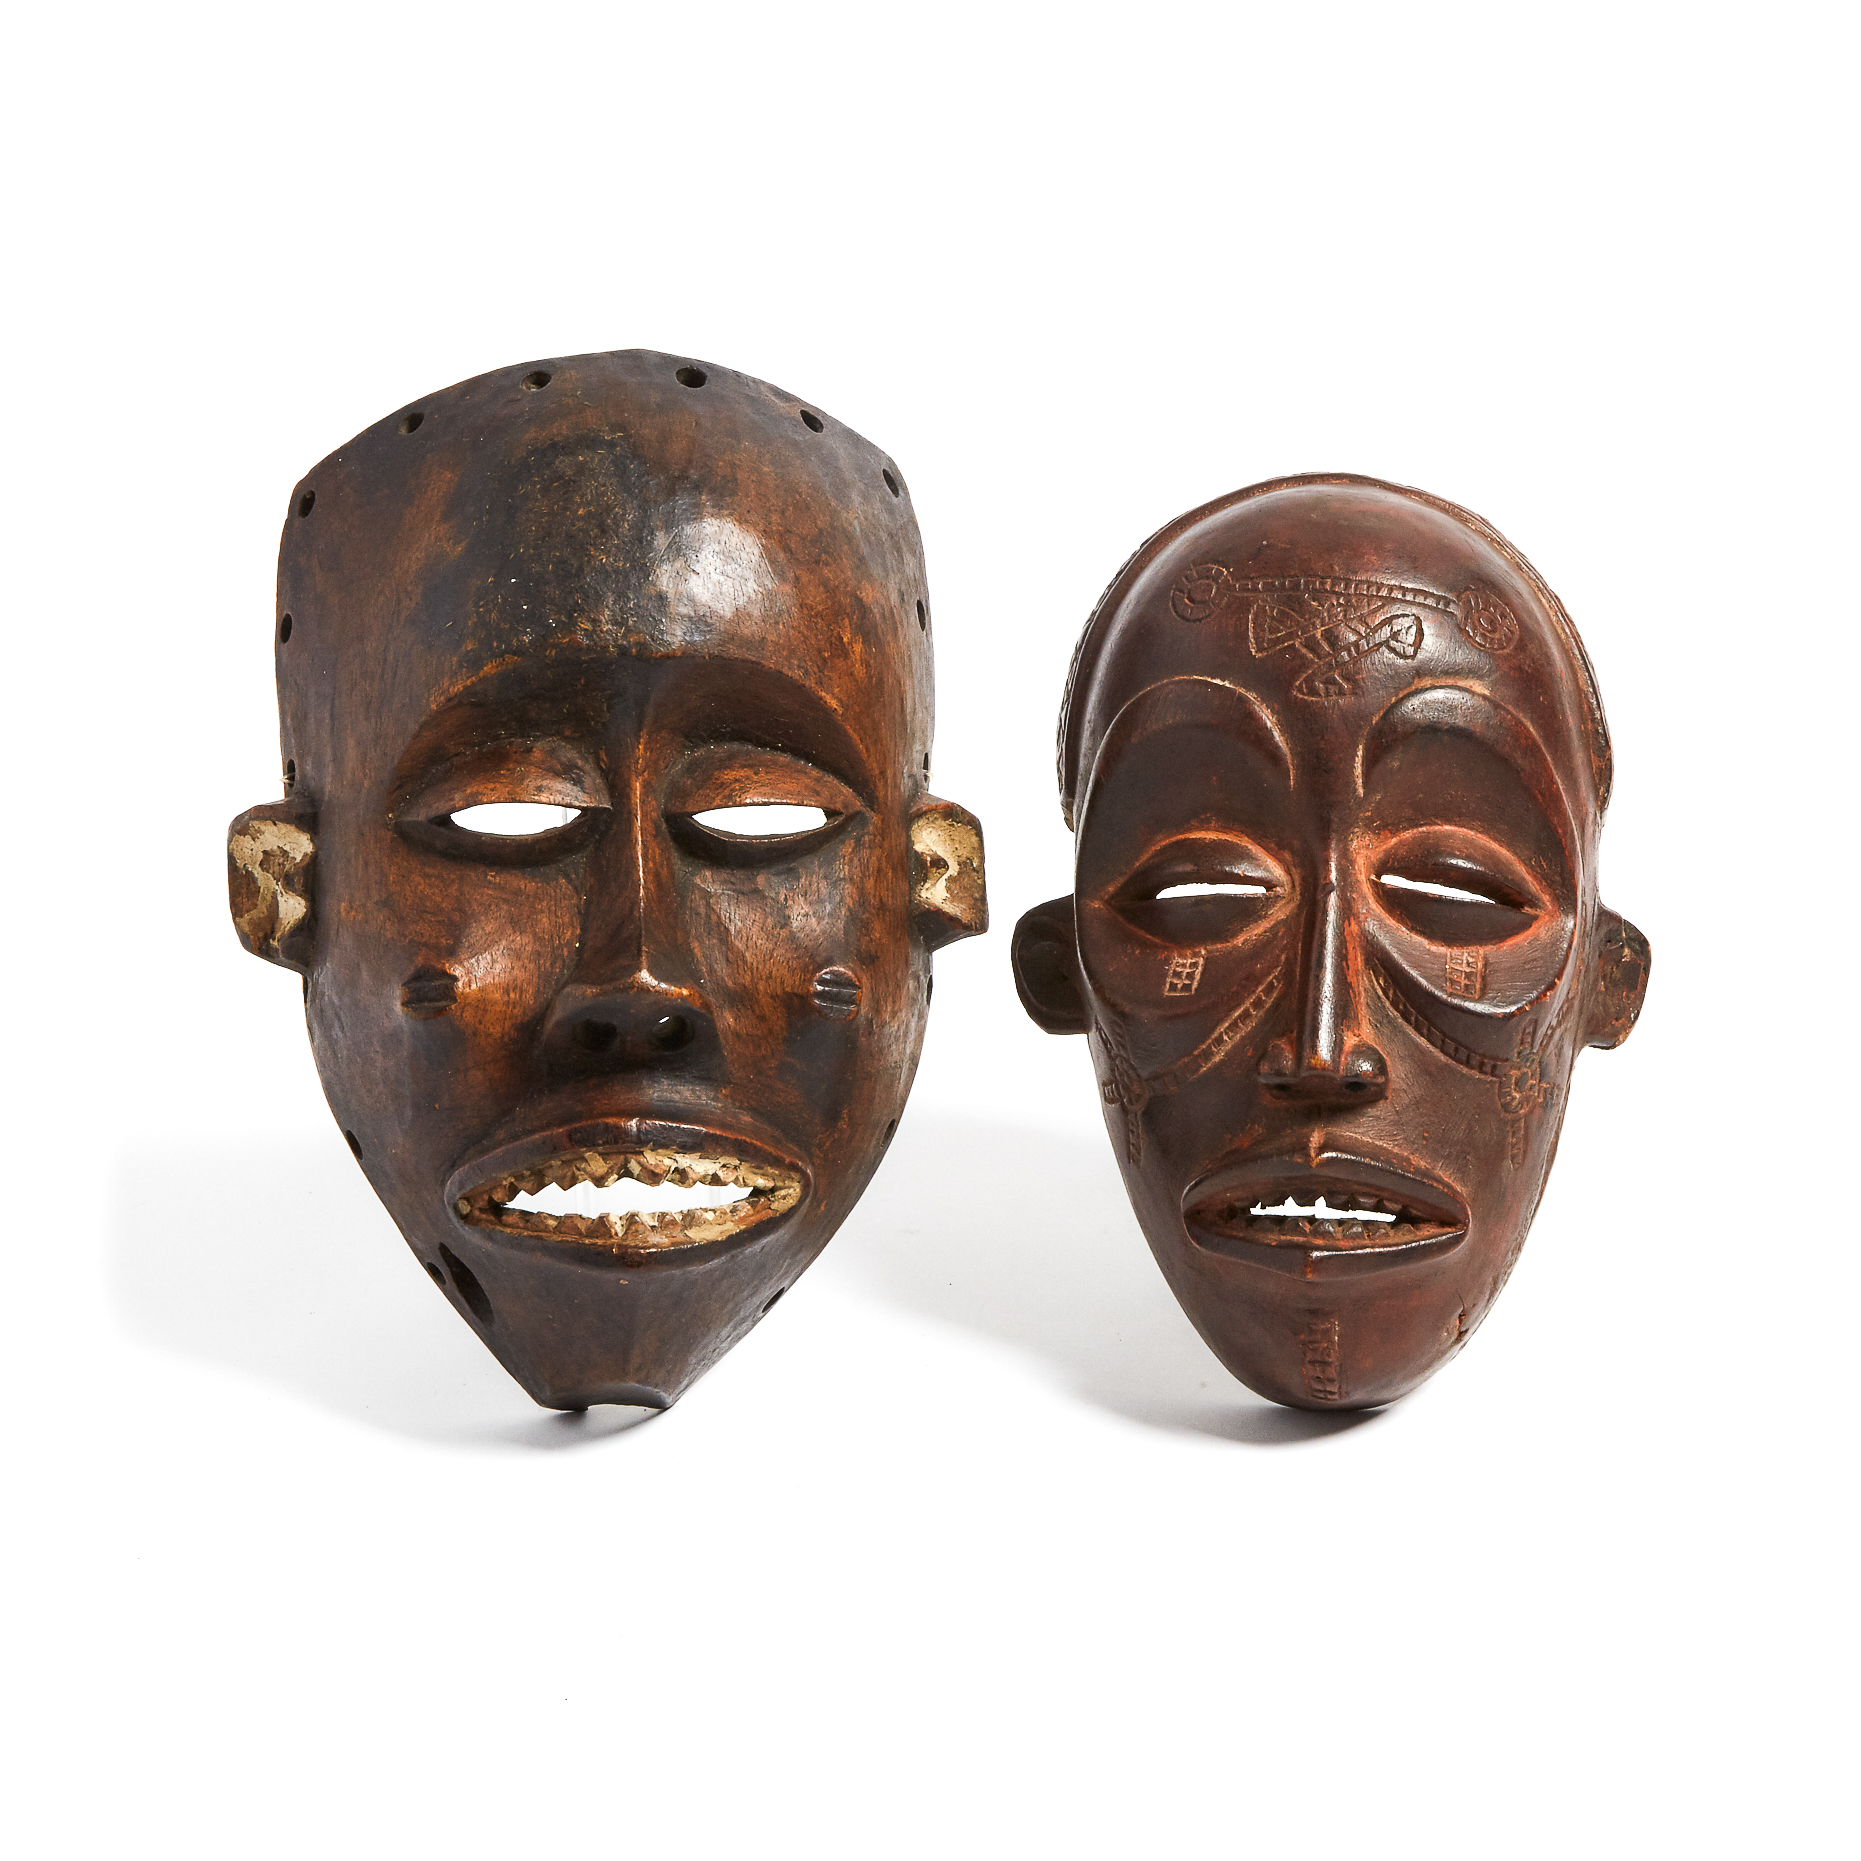 Two Chokwe Masks, Central Africa, mid to late 20th century